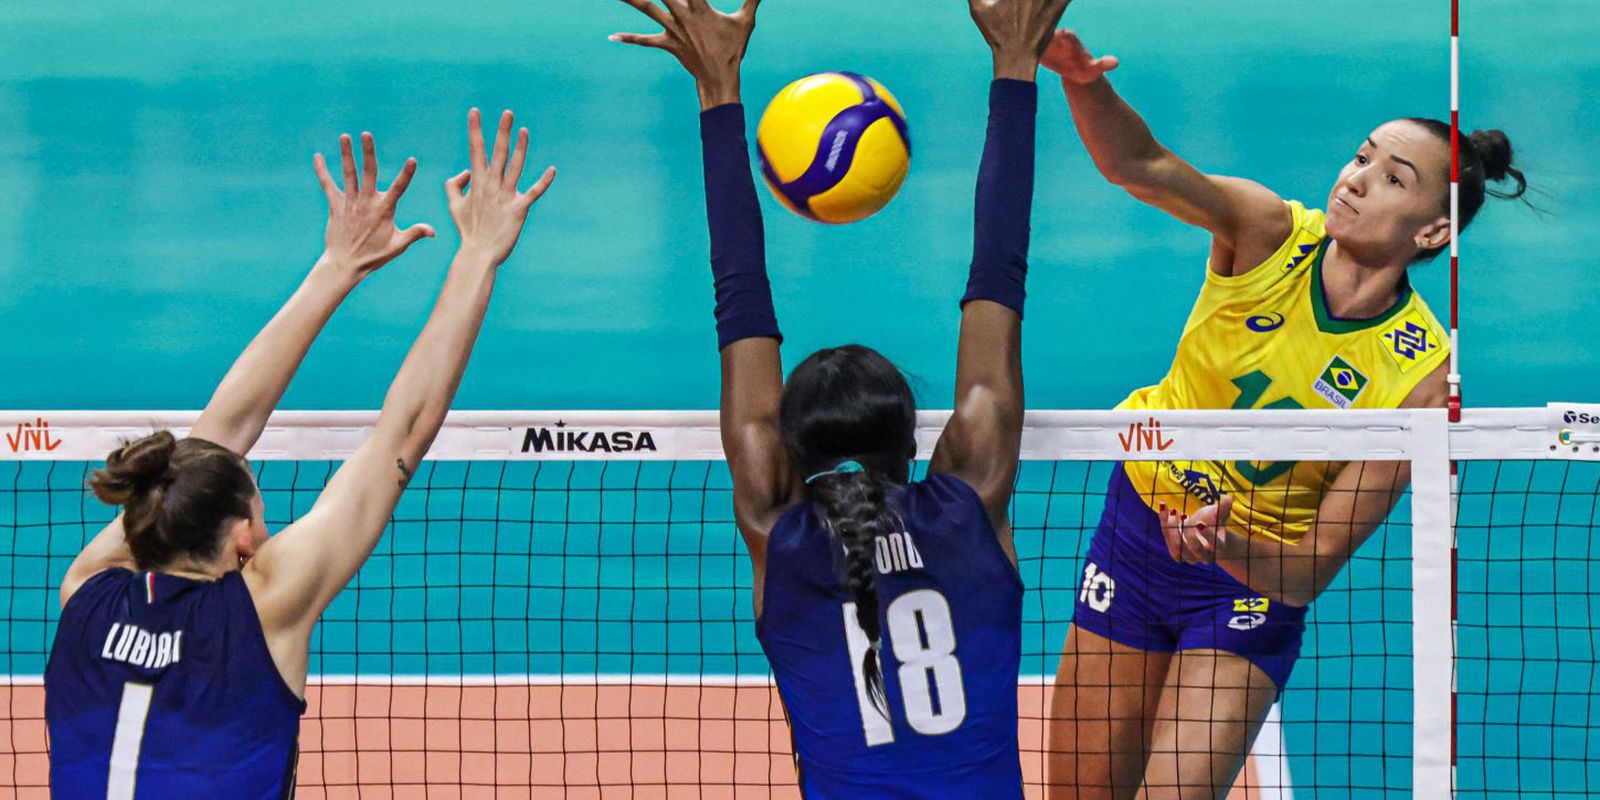 Brazil suffers second defeat in Volleyball Nations League